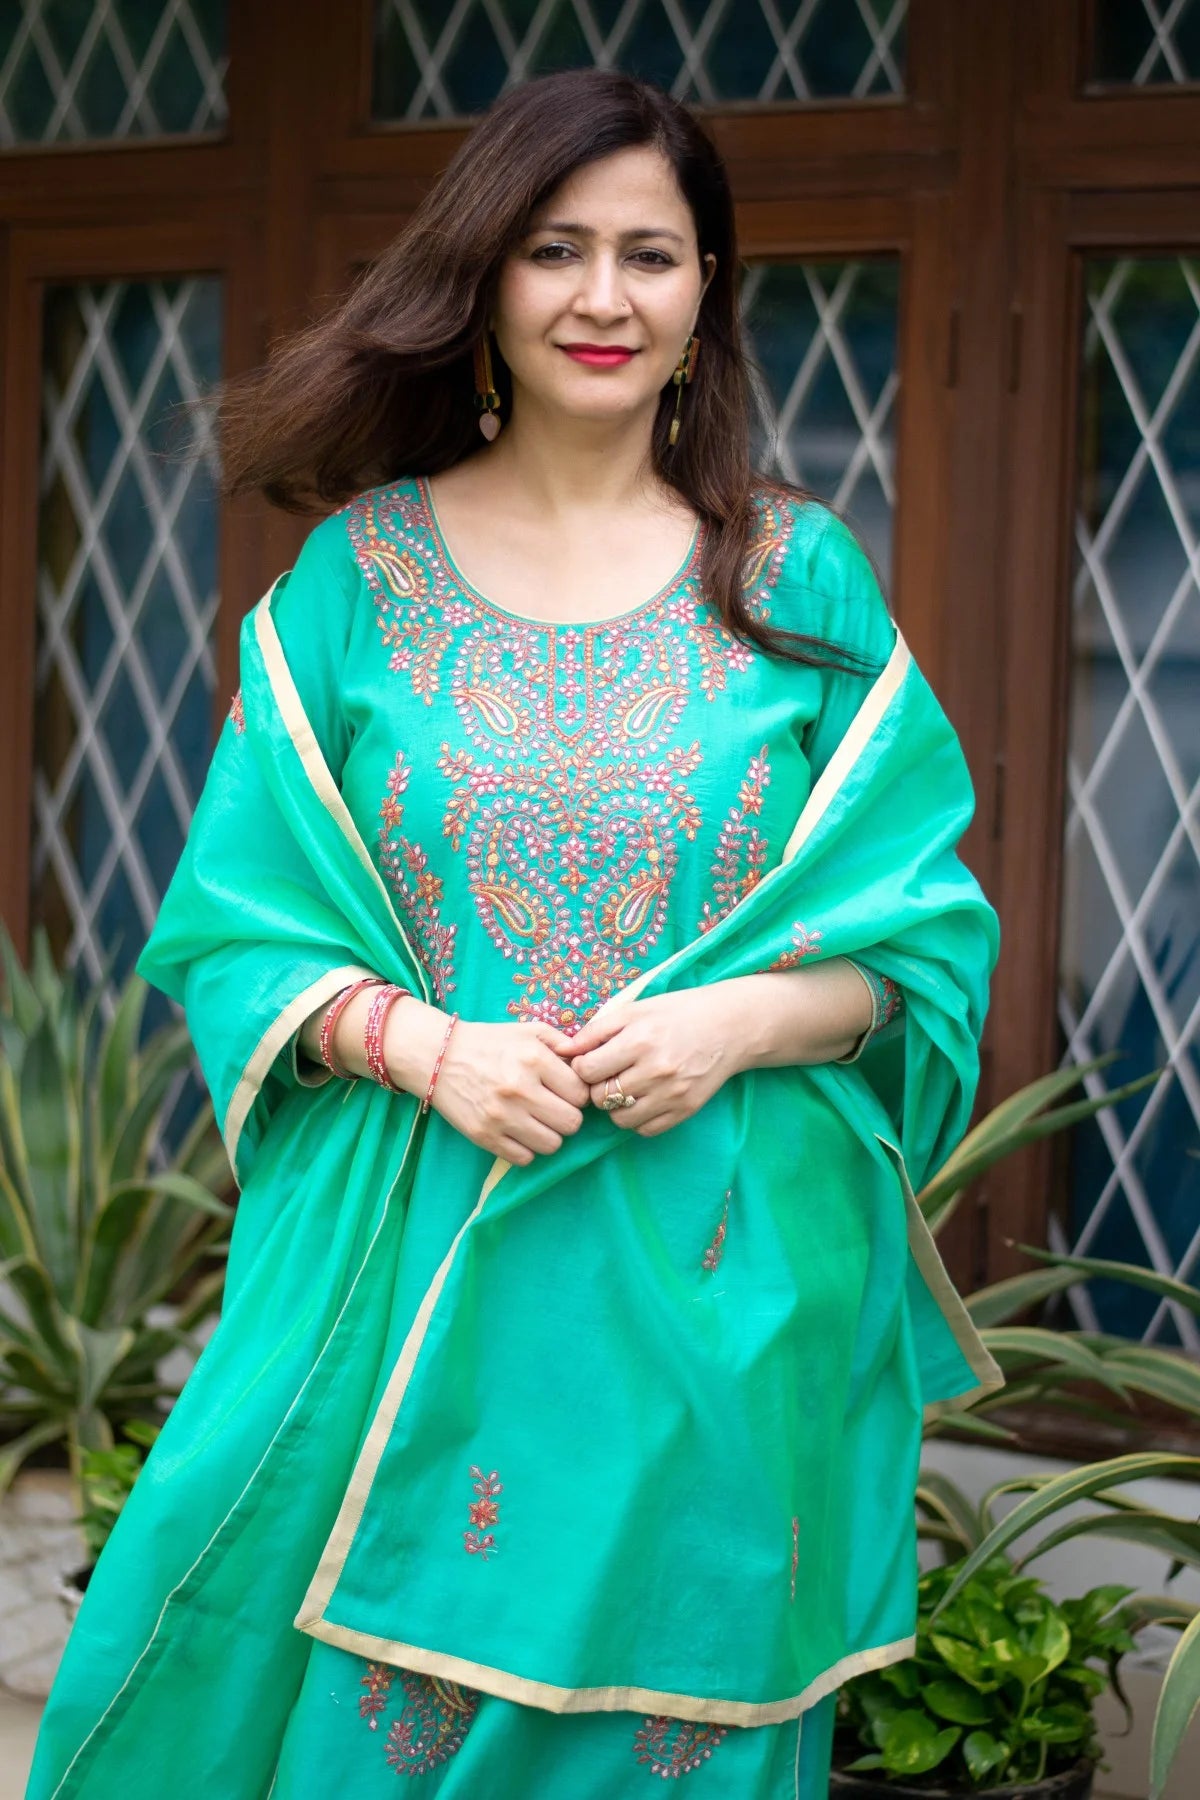 A traditional Indian outfit consisting of a sea green zari kurta and matching leggings.